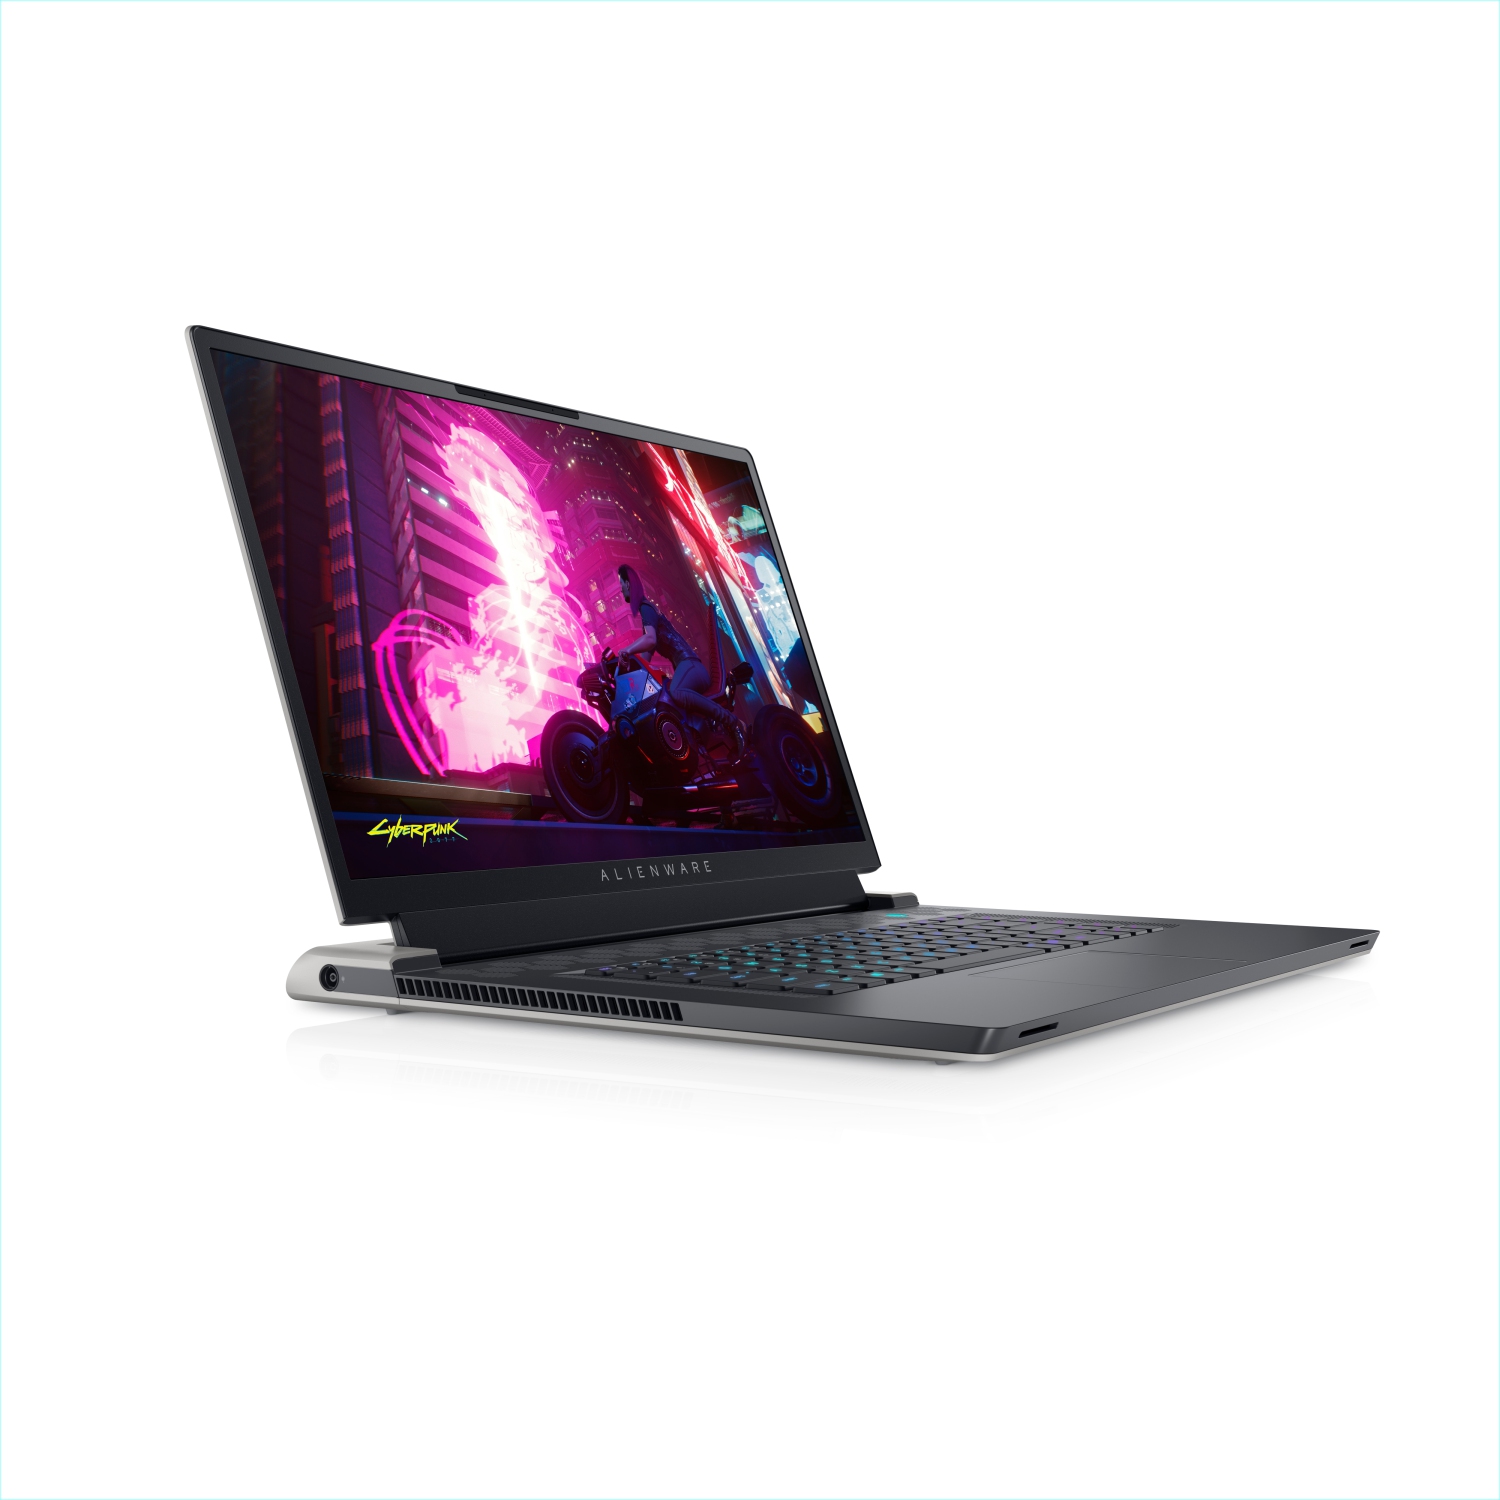 Refurbished (Excellent) - Dell Alienware X17 R1 Gaming Laptop (2021), 17.3" FHD, Core i7, 1TB SSD, 16GB RAM, RTX 3080, 8 Cores @ 4.6 GHz, 11th Gen CPU Certified